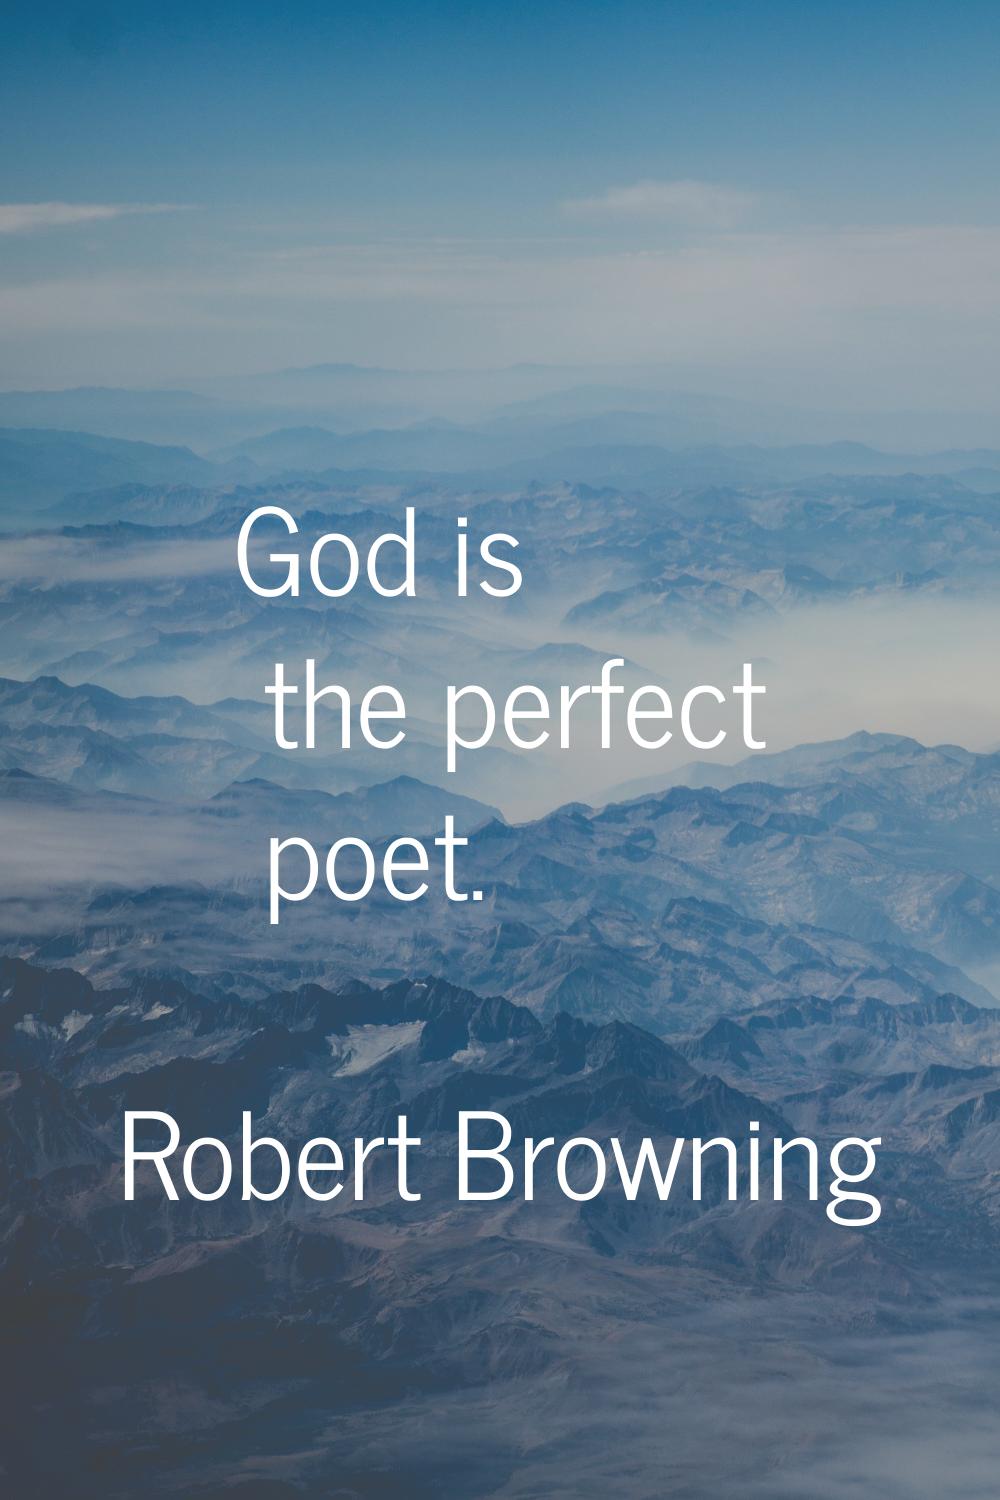 God is the perfect poet.